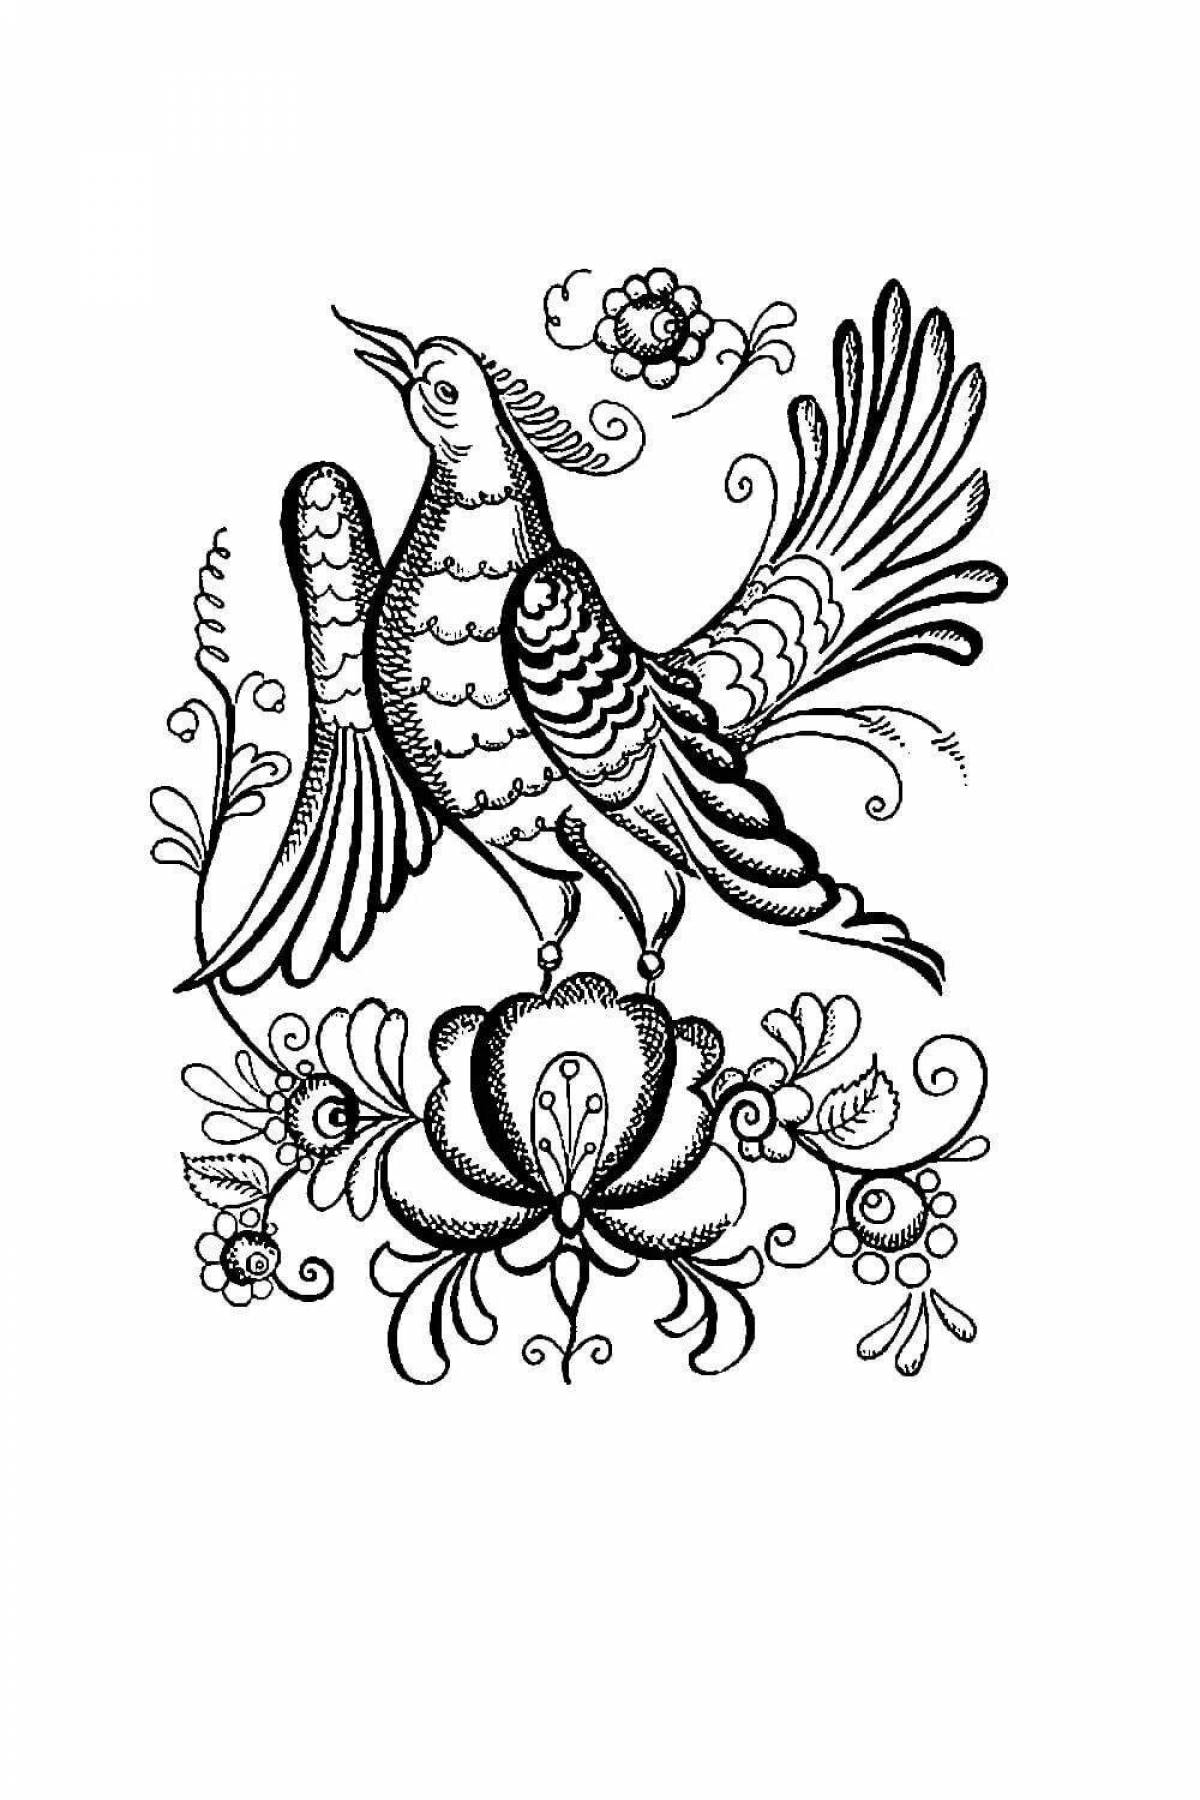 Coloring page energetic Gzhel bird